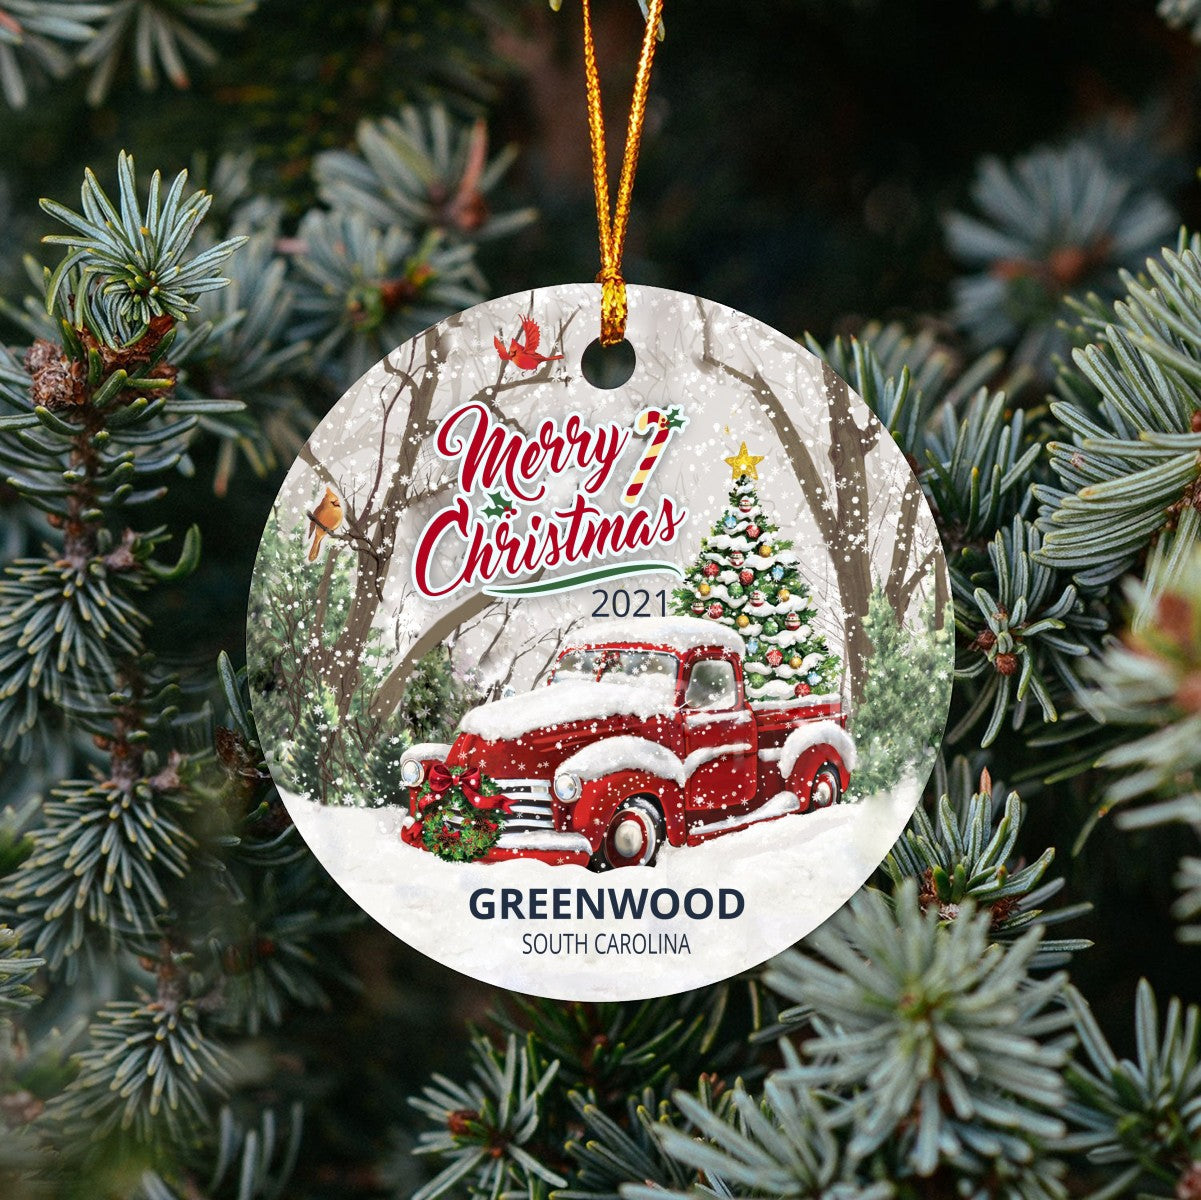 Christmas Tree Ornaments Greenwood - Ornament Customize With Name City And State Greenwood South Carolina SC - Red Truck Xmas Ornaments 3'' Plastic Gift For Family, Friend And Housewarming